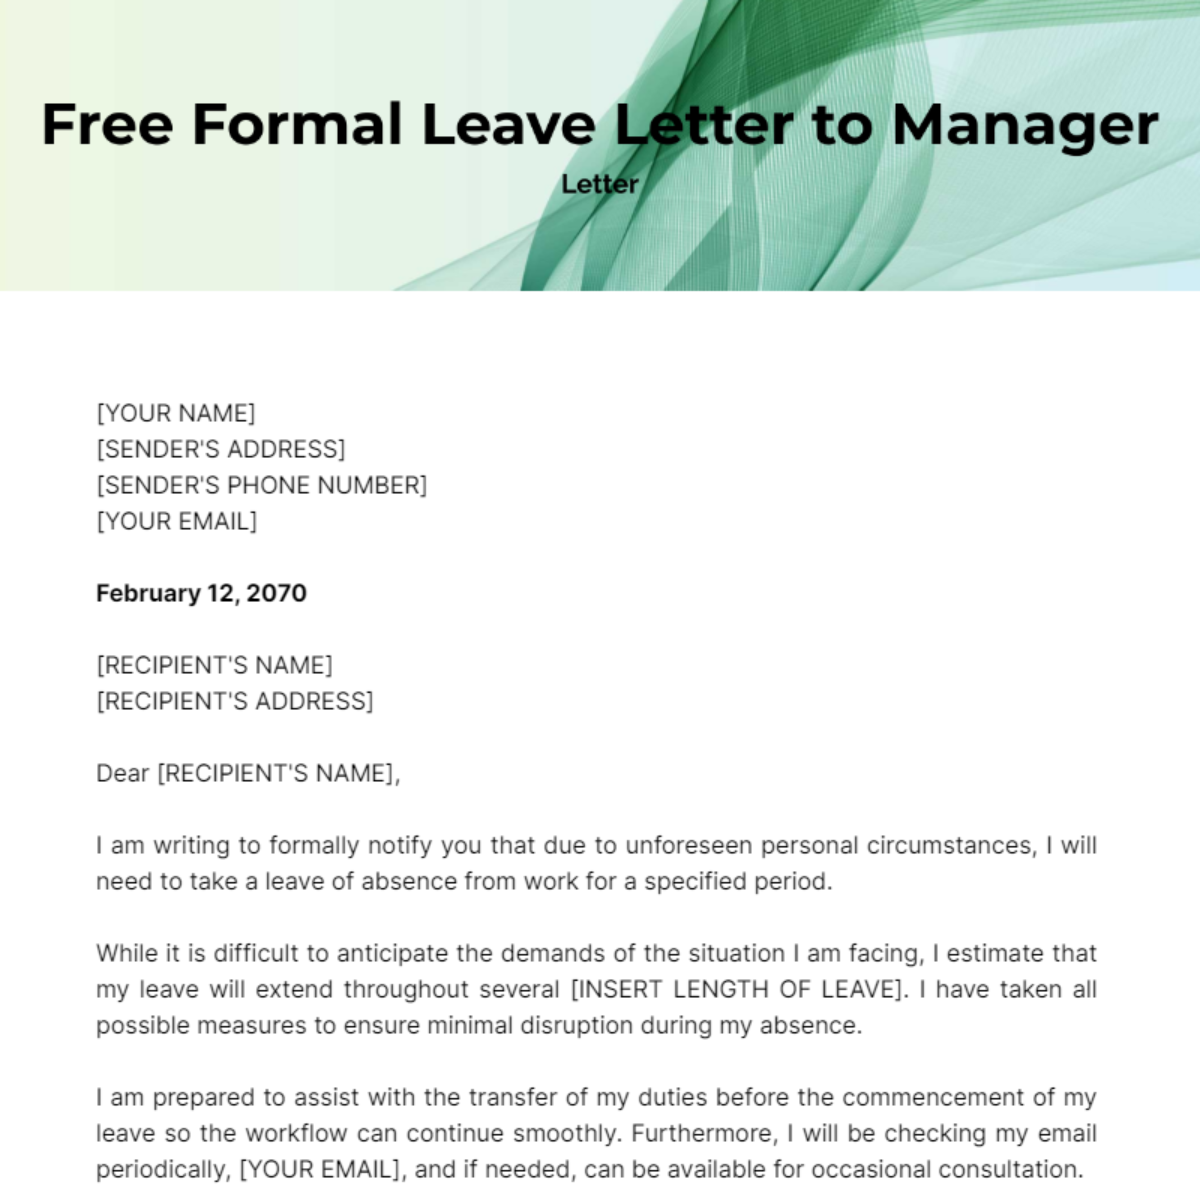 Formal Leave Letter to Manager Template